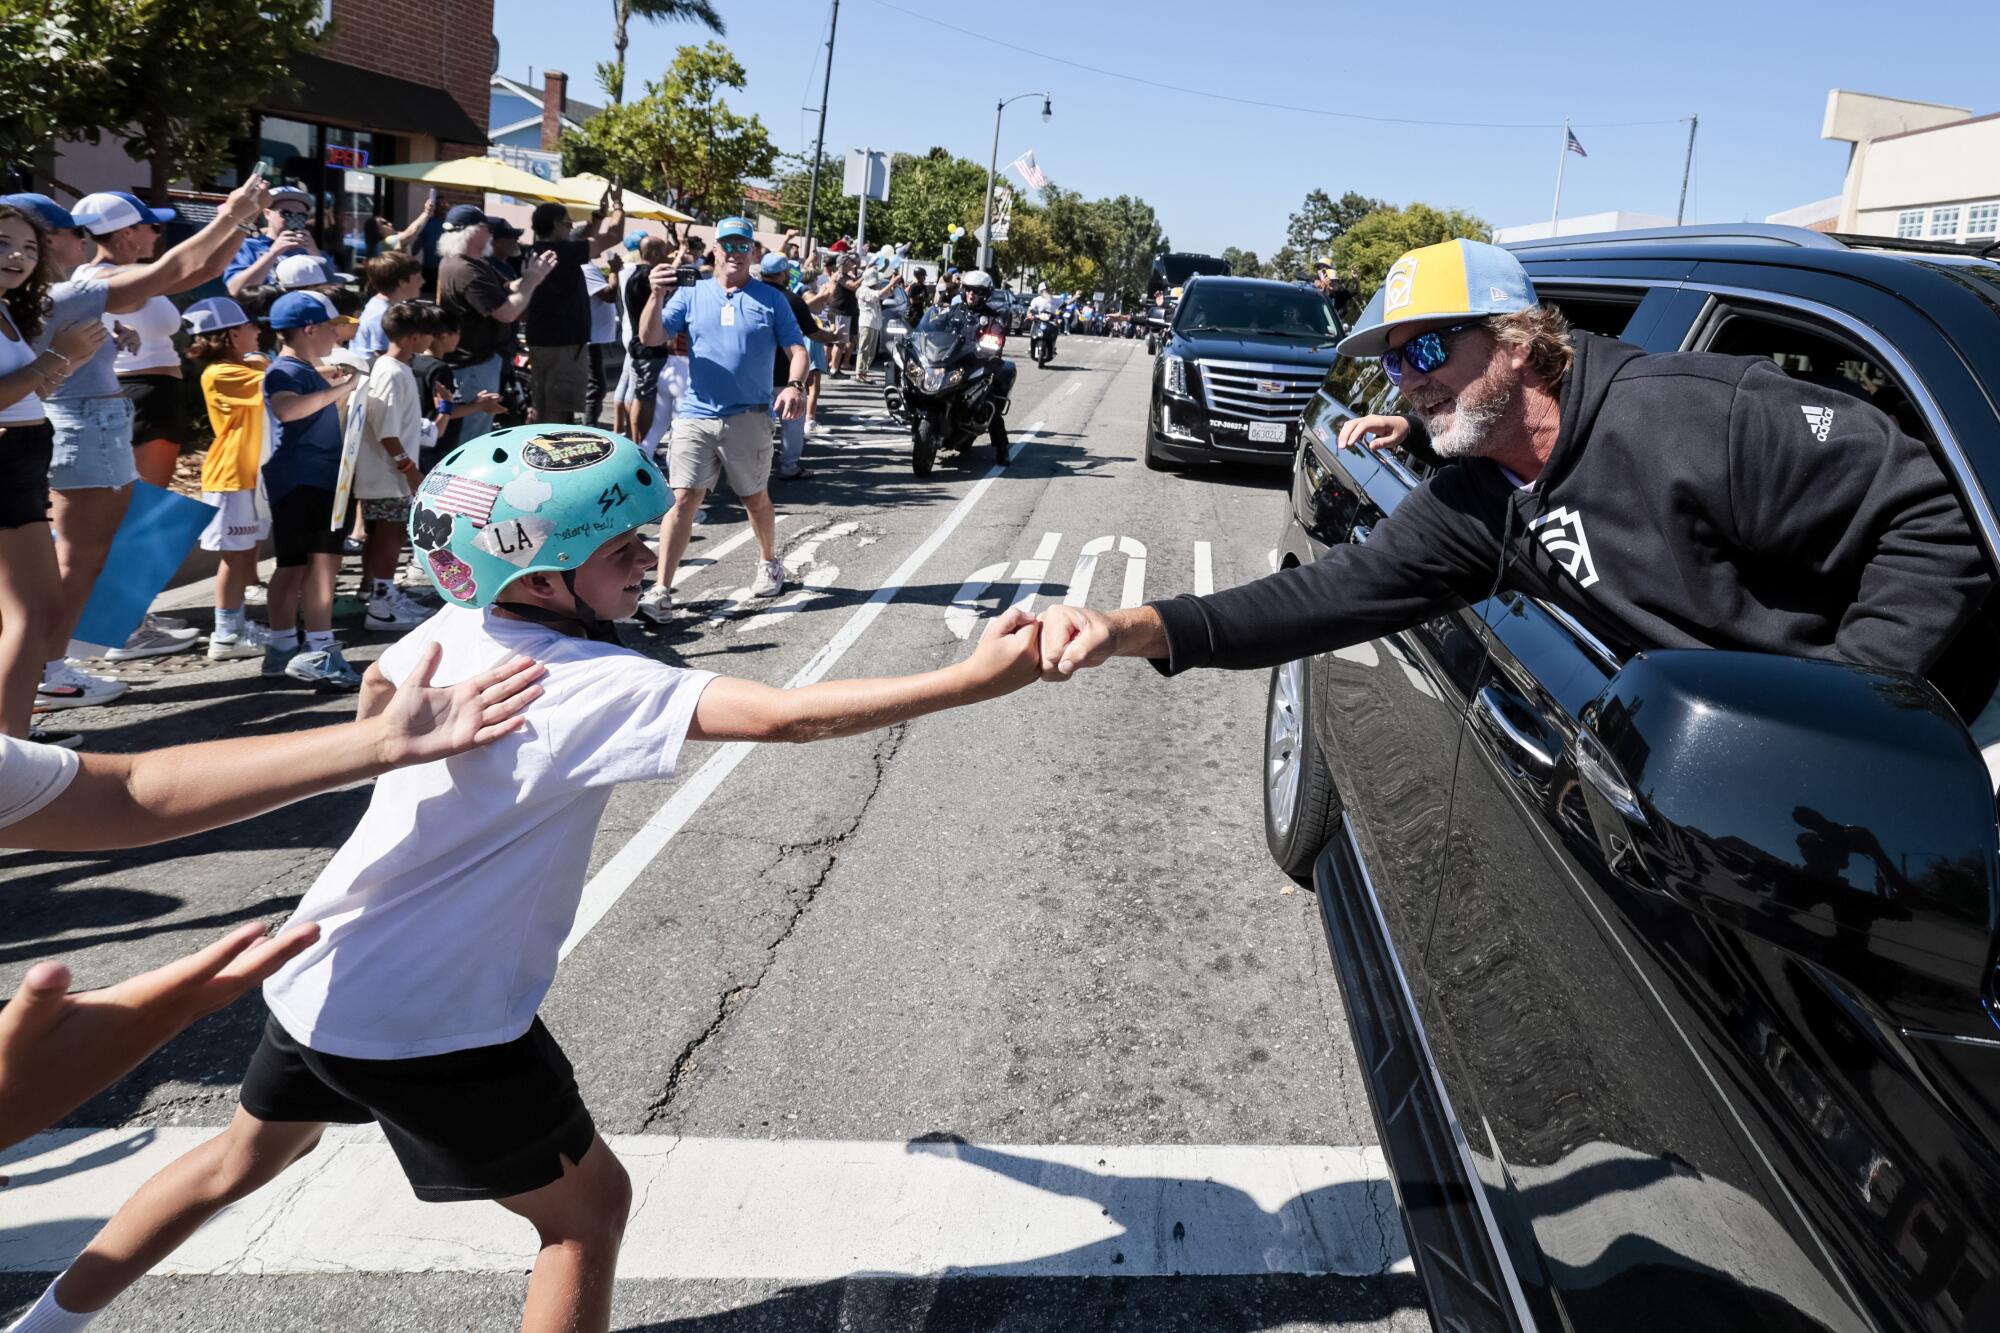 A man with a graying beard and baseball cap reaches out of a car window to clasp hands with a boy among a crowd.